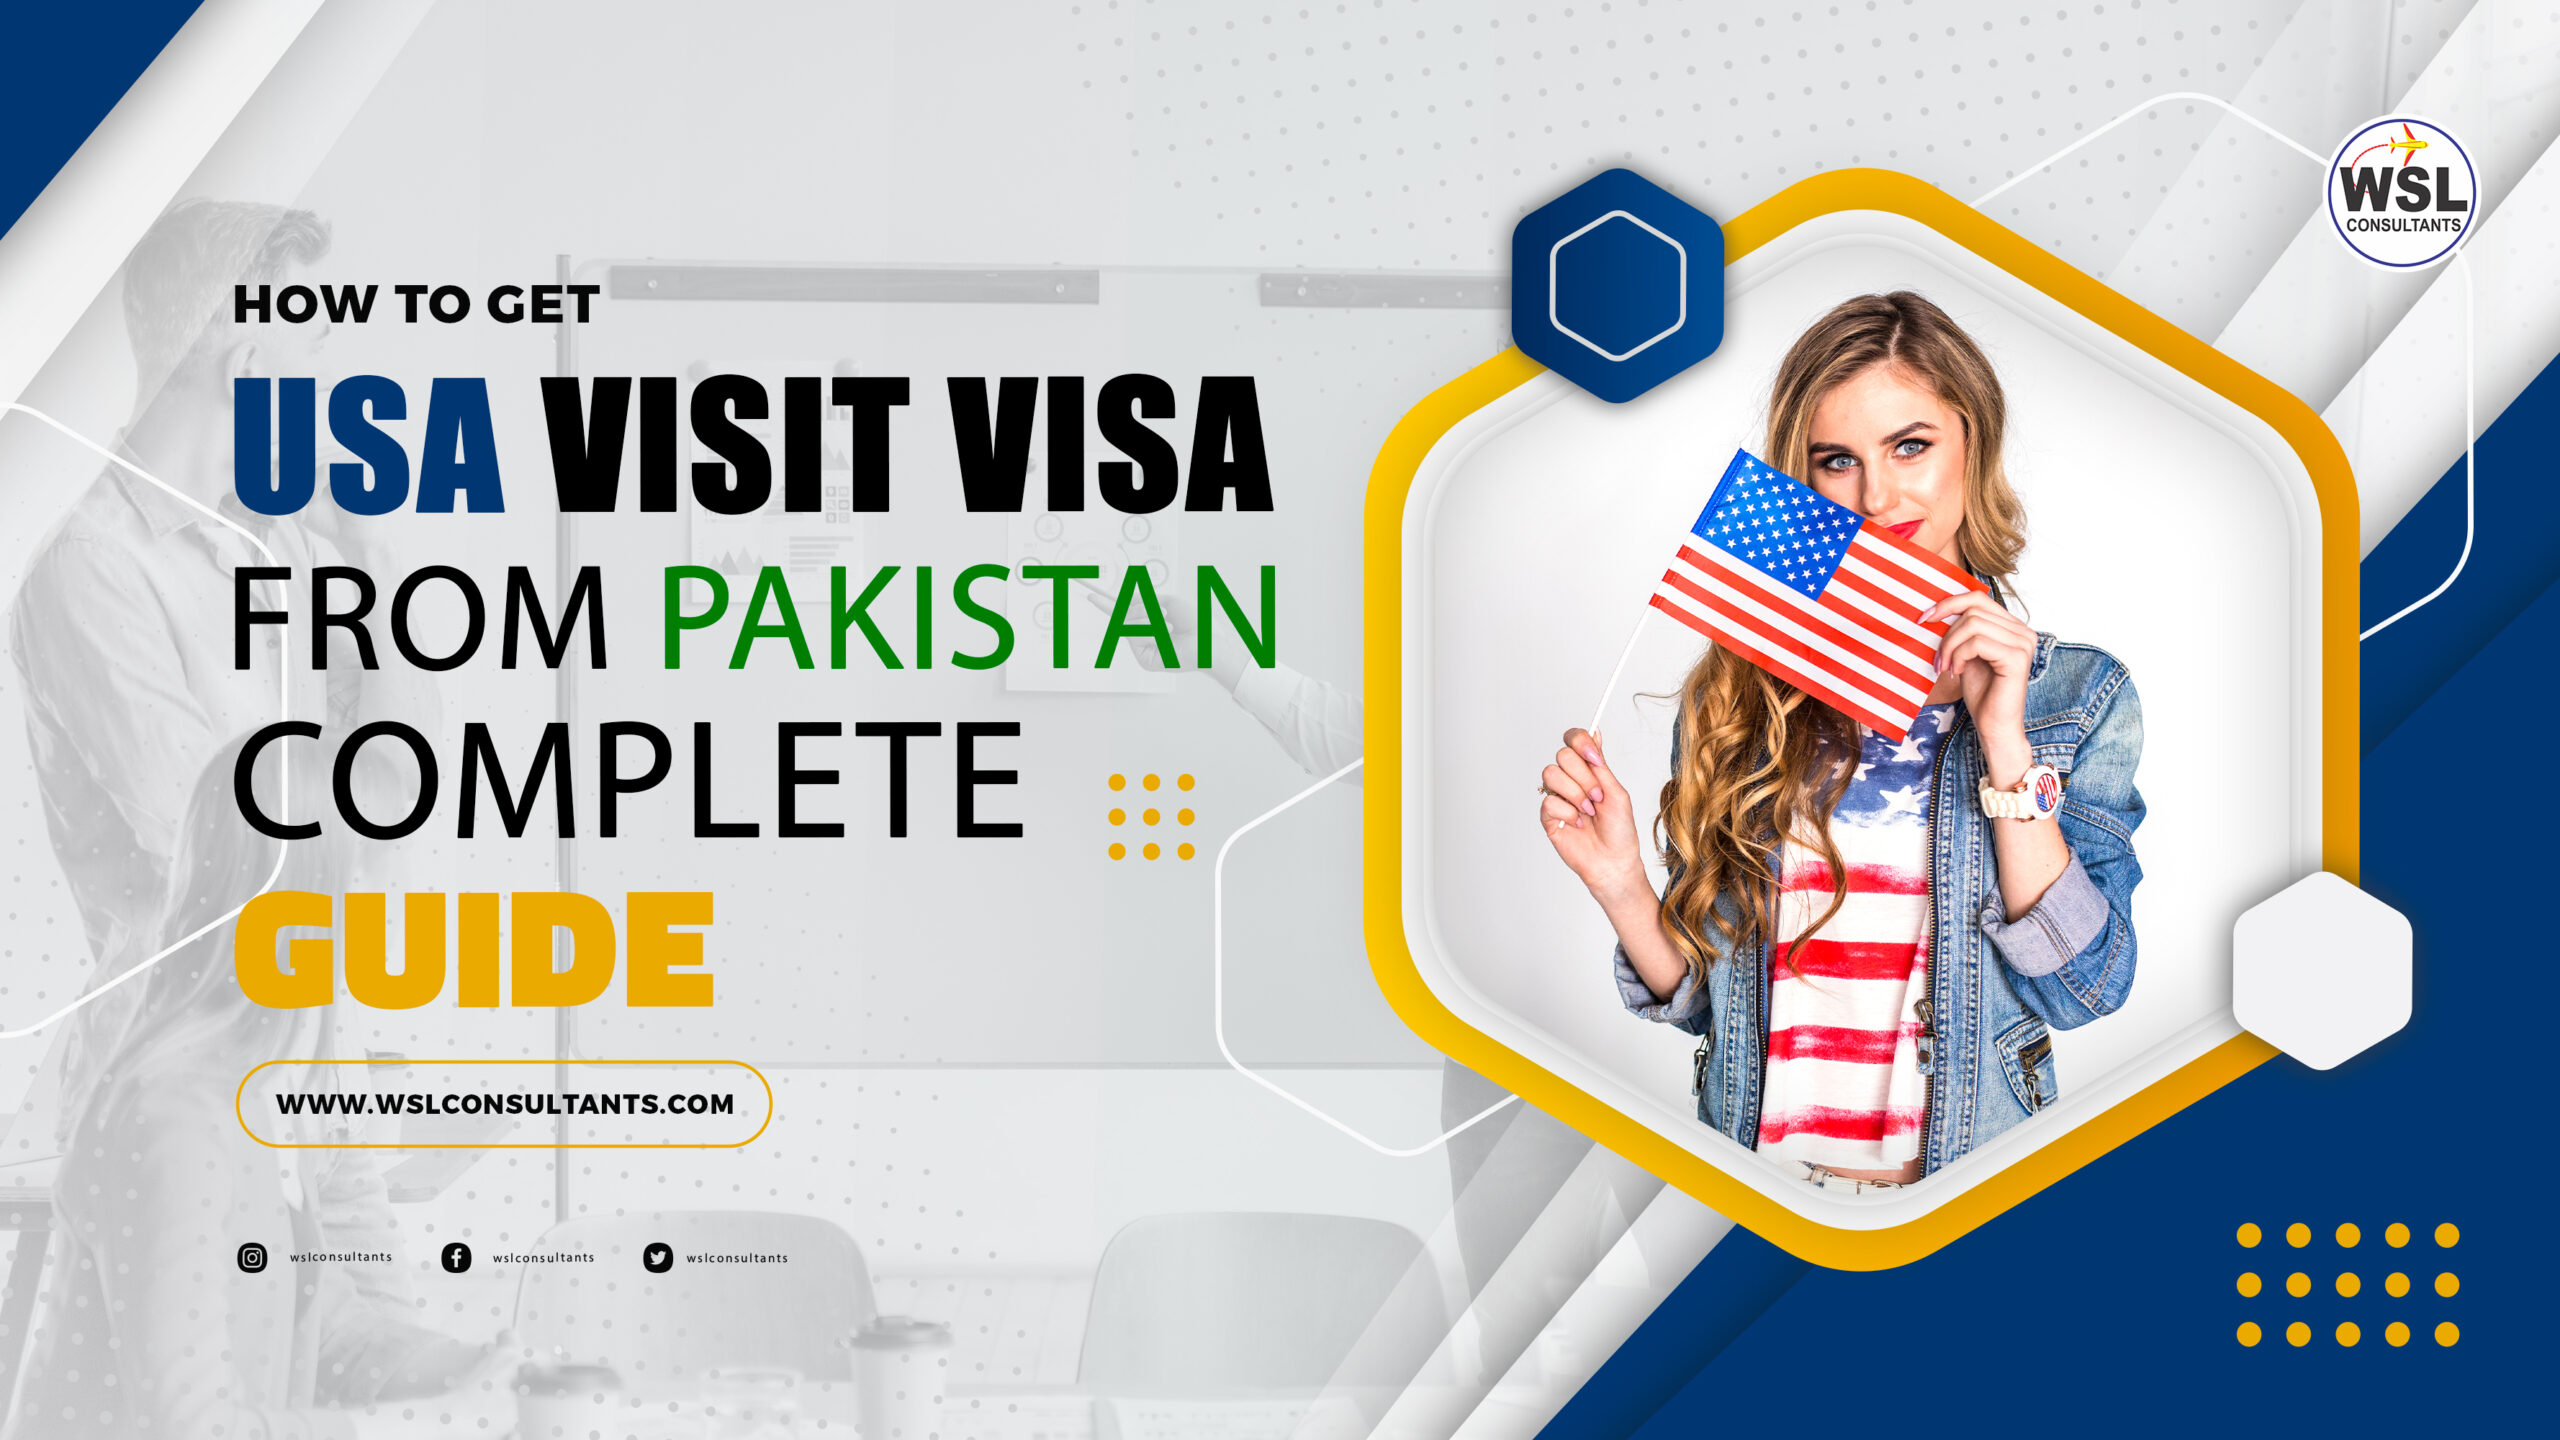 How to get USA visit visa from pakistan